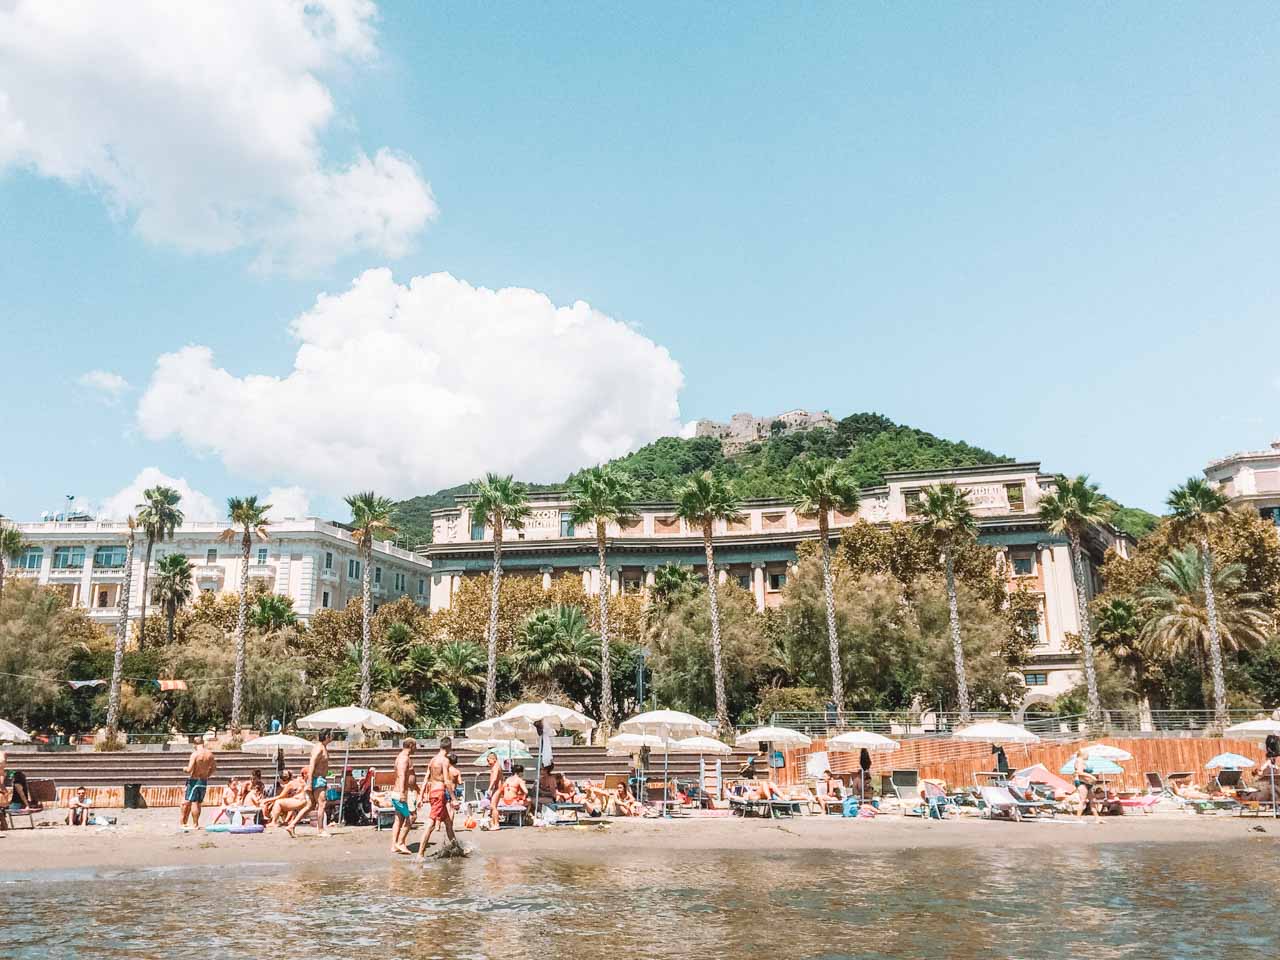 Tourists on the beach in Salerno and Castello di Arechi seen from the water